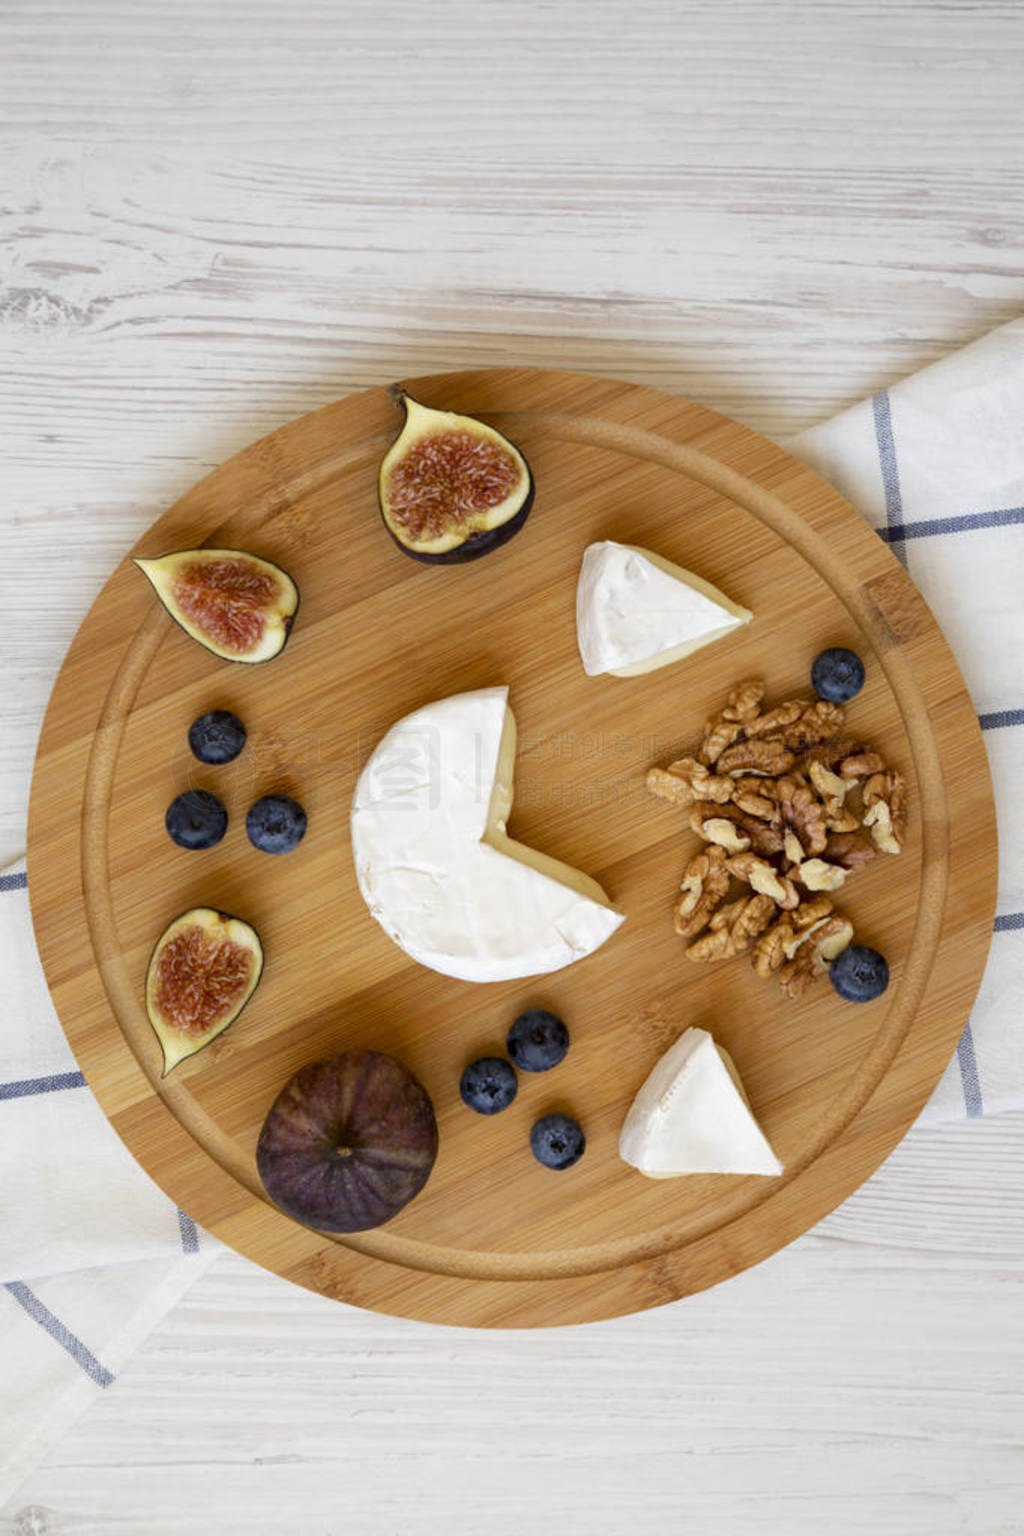 Camembert cheese with figs, blueberries and walnuts on a bamboo